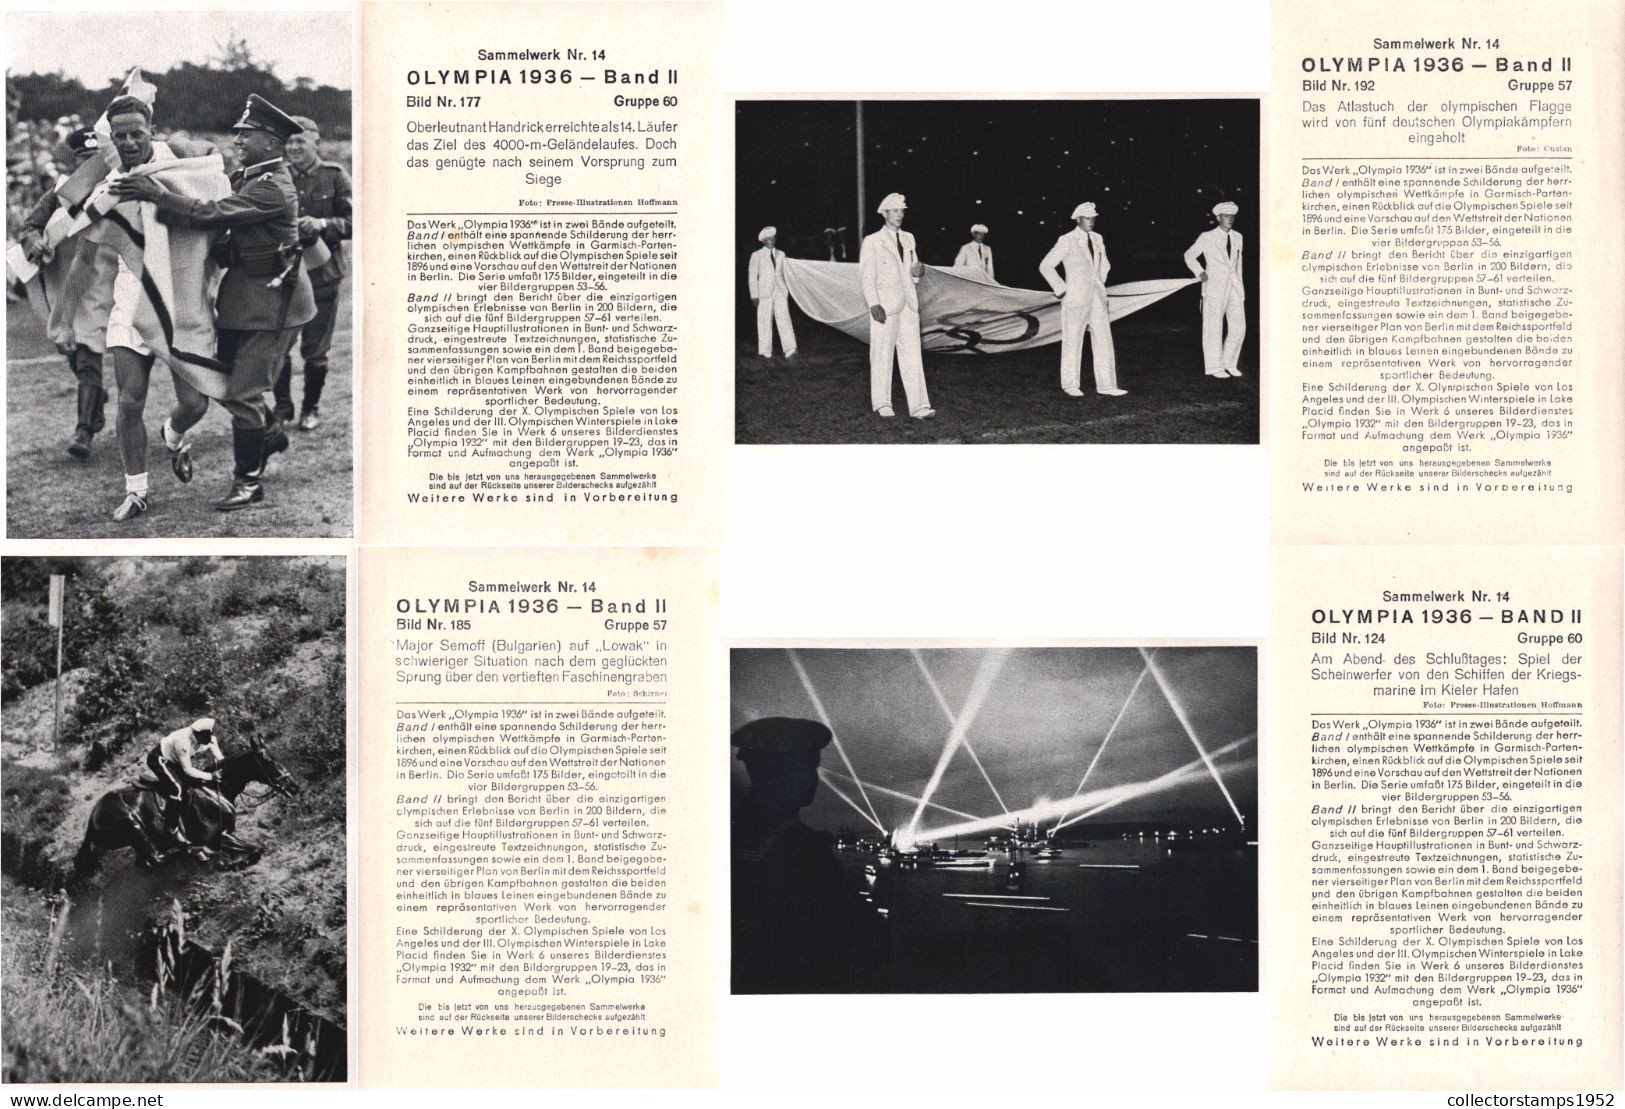 SPORTS, SET OF 71 PIECES, OLYMPIA 1936, BAND II, ED. VOL. 14., BERLIN, STADION, FLAG, BOAT, ARCHITECTURE, HORSE, GERMANY